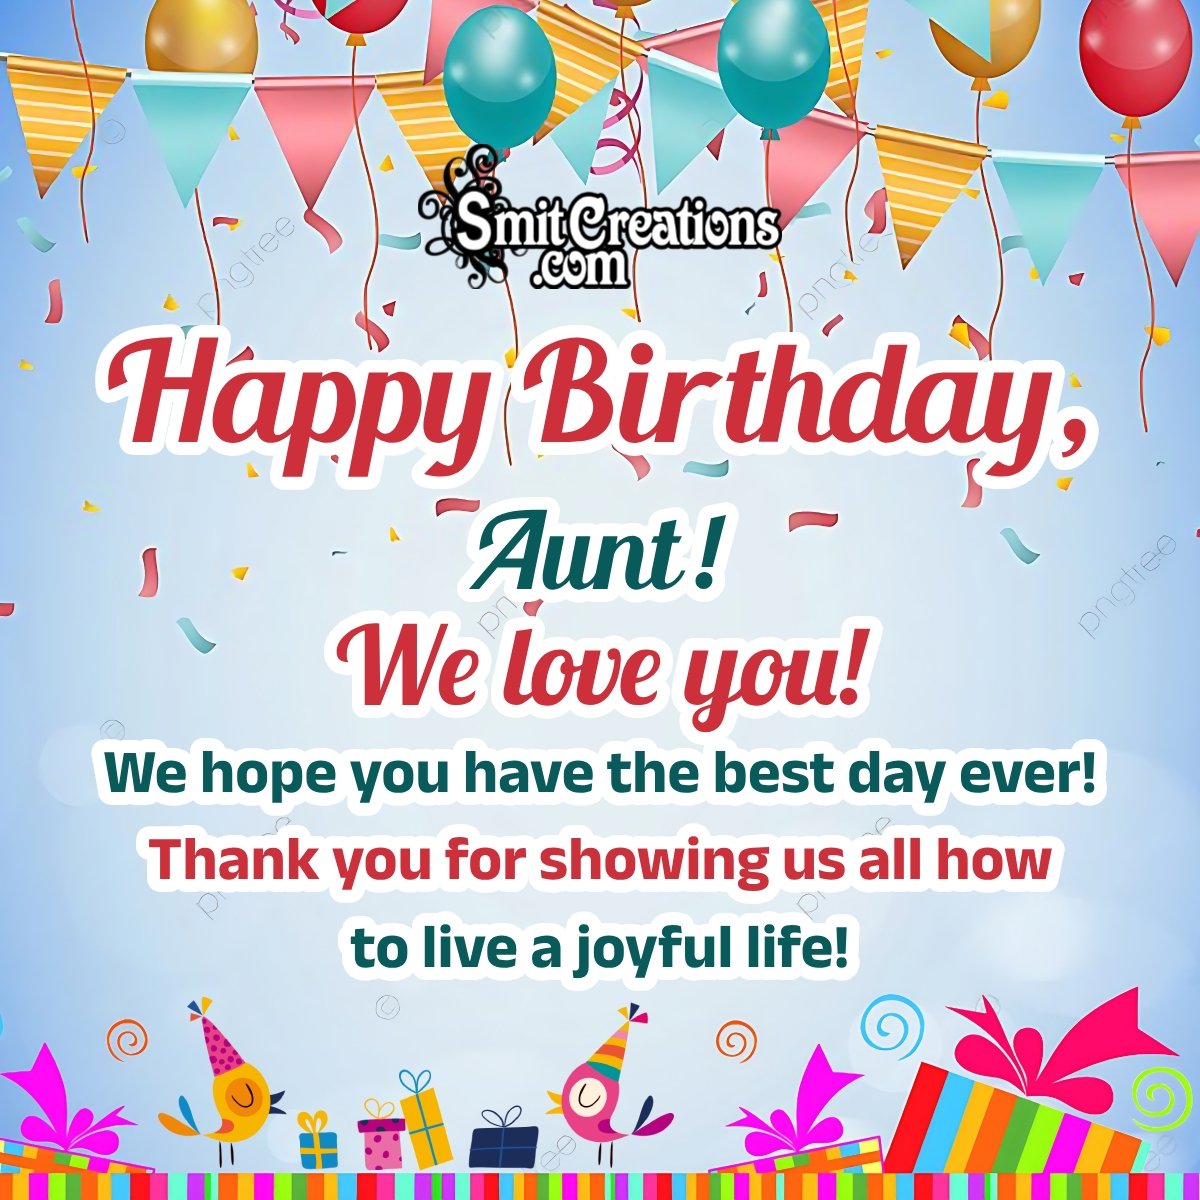 Best Birthday Wishes For Aunt